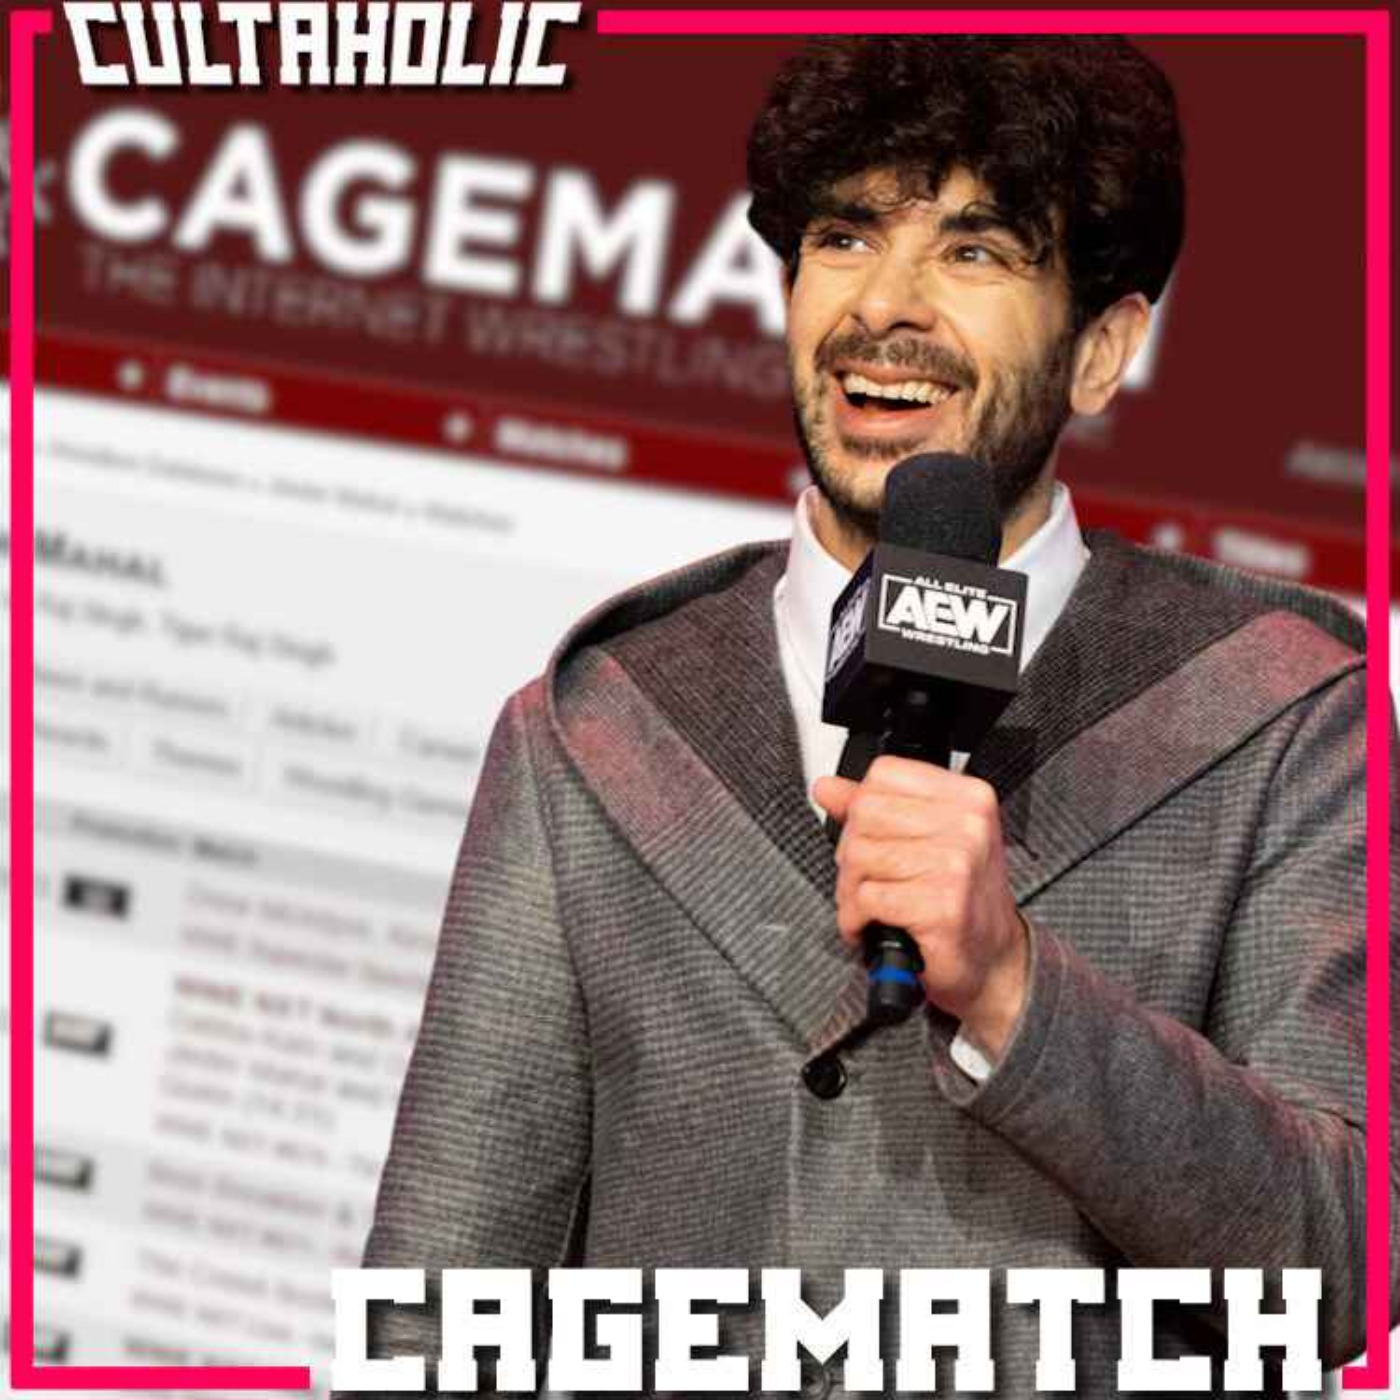 How Does CAGEMATCH Work? - Exclusive Interview with Flosch, Social Media Manager and host of CageCast